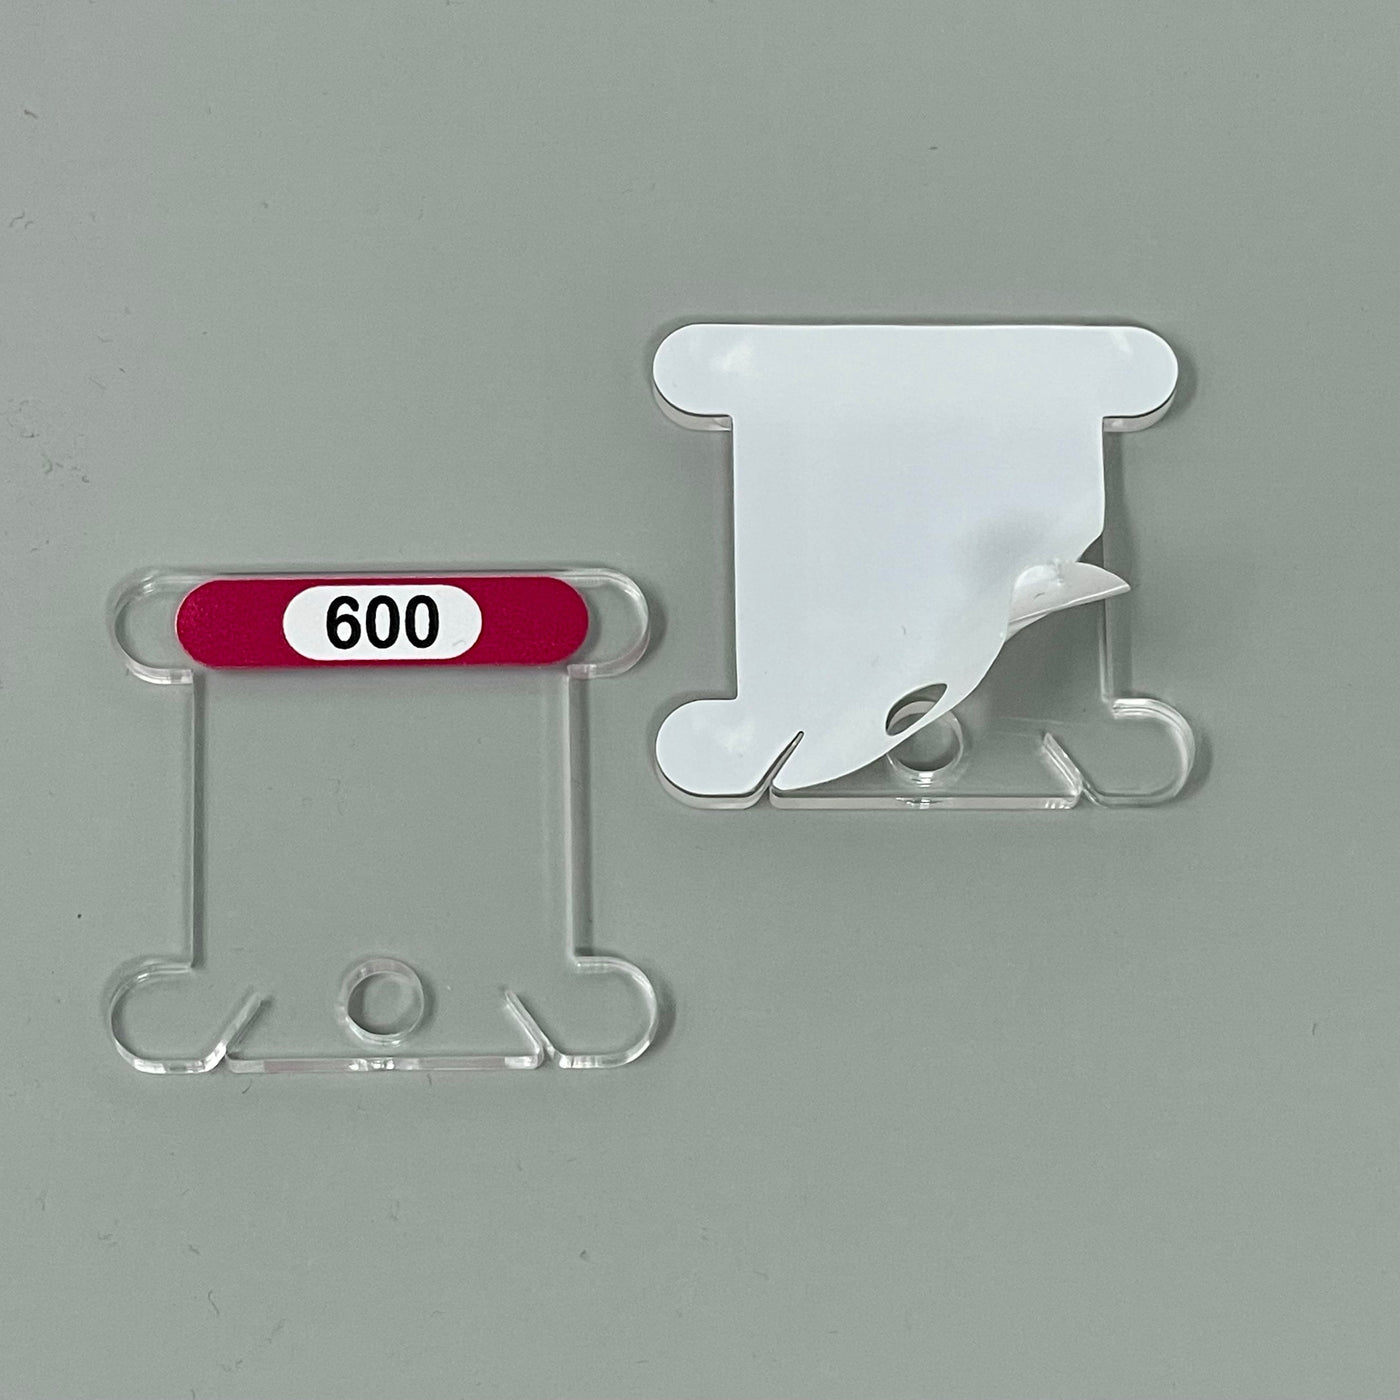 DMC CLEAR 3mm acrylic bobbins with printed number and colour swatch (x504 bobbins)